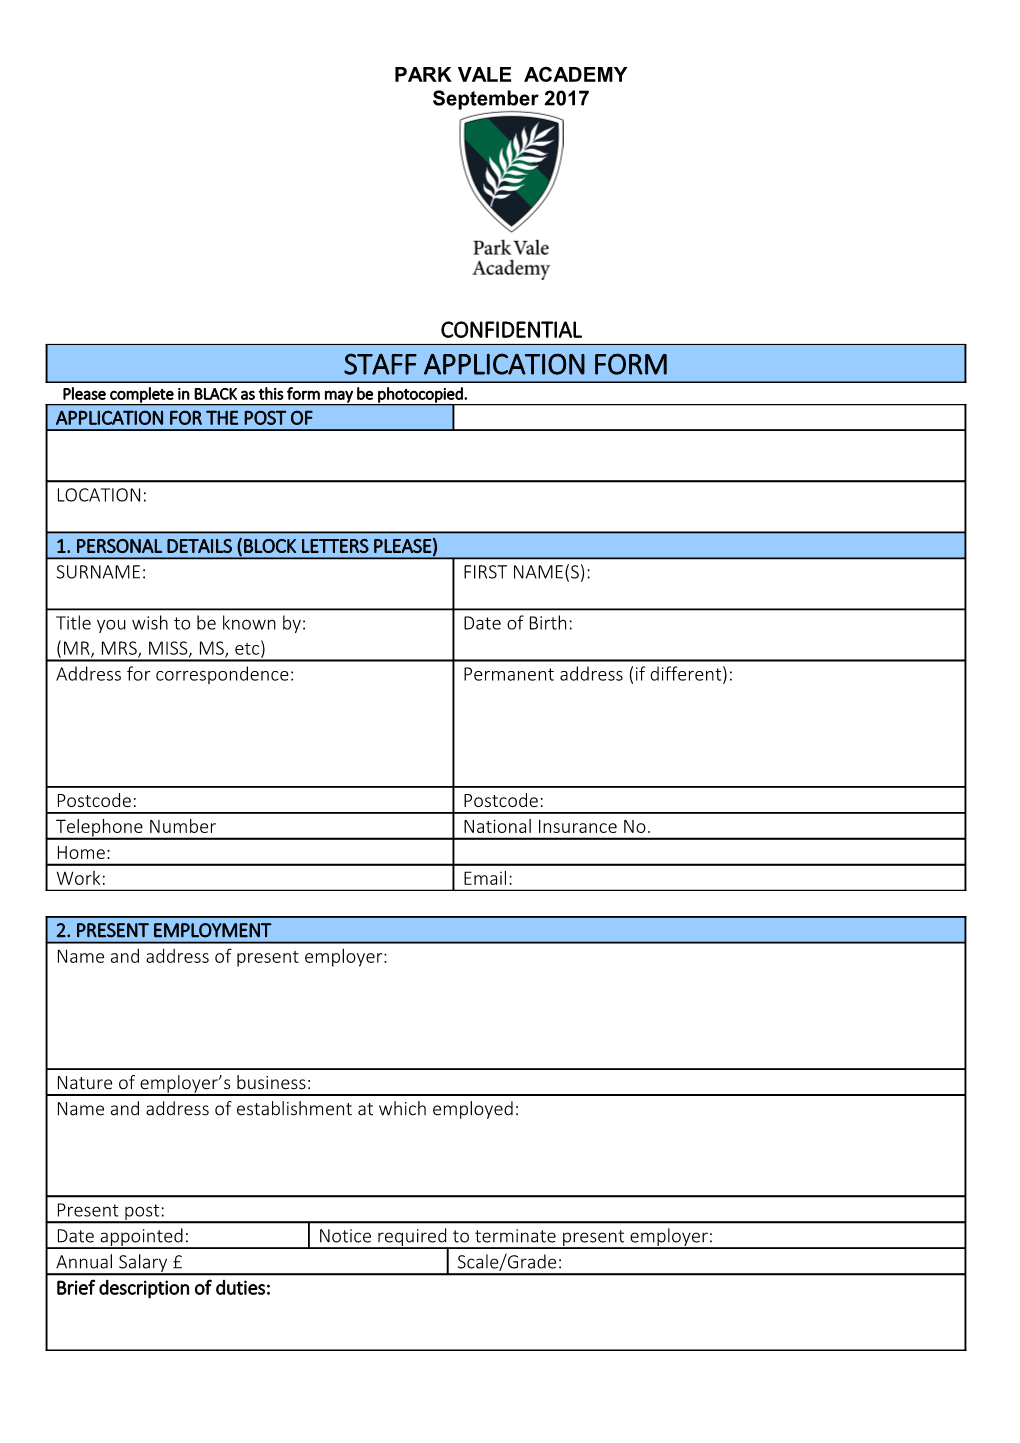 Please Complete in BLACK As This Form May Be Photocopied